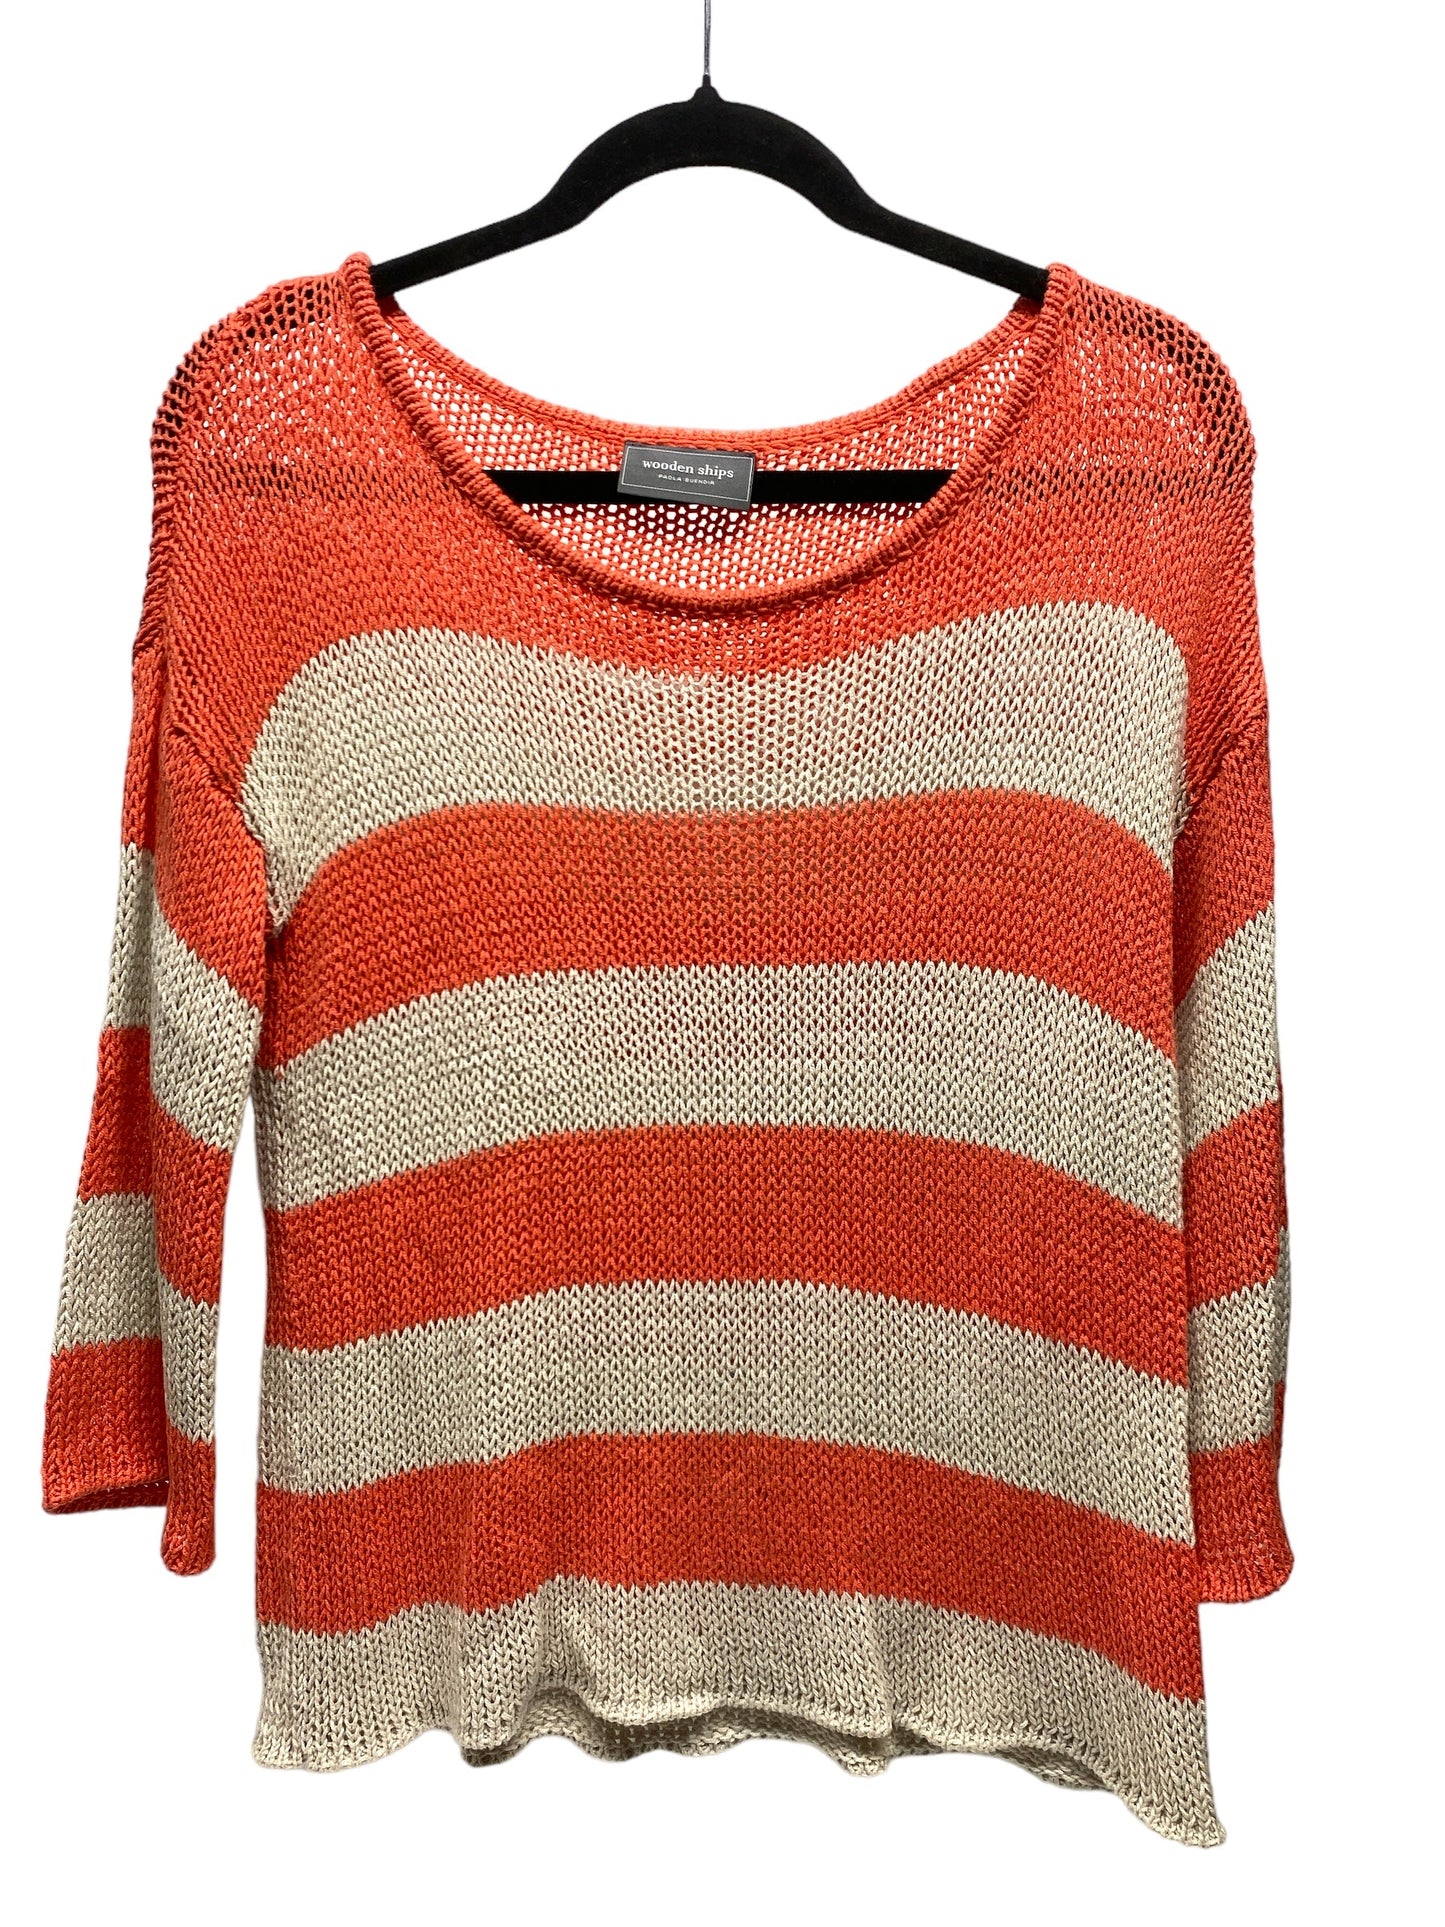 Striped Pattern Sweater Wooden Ships, Size S